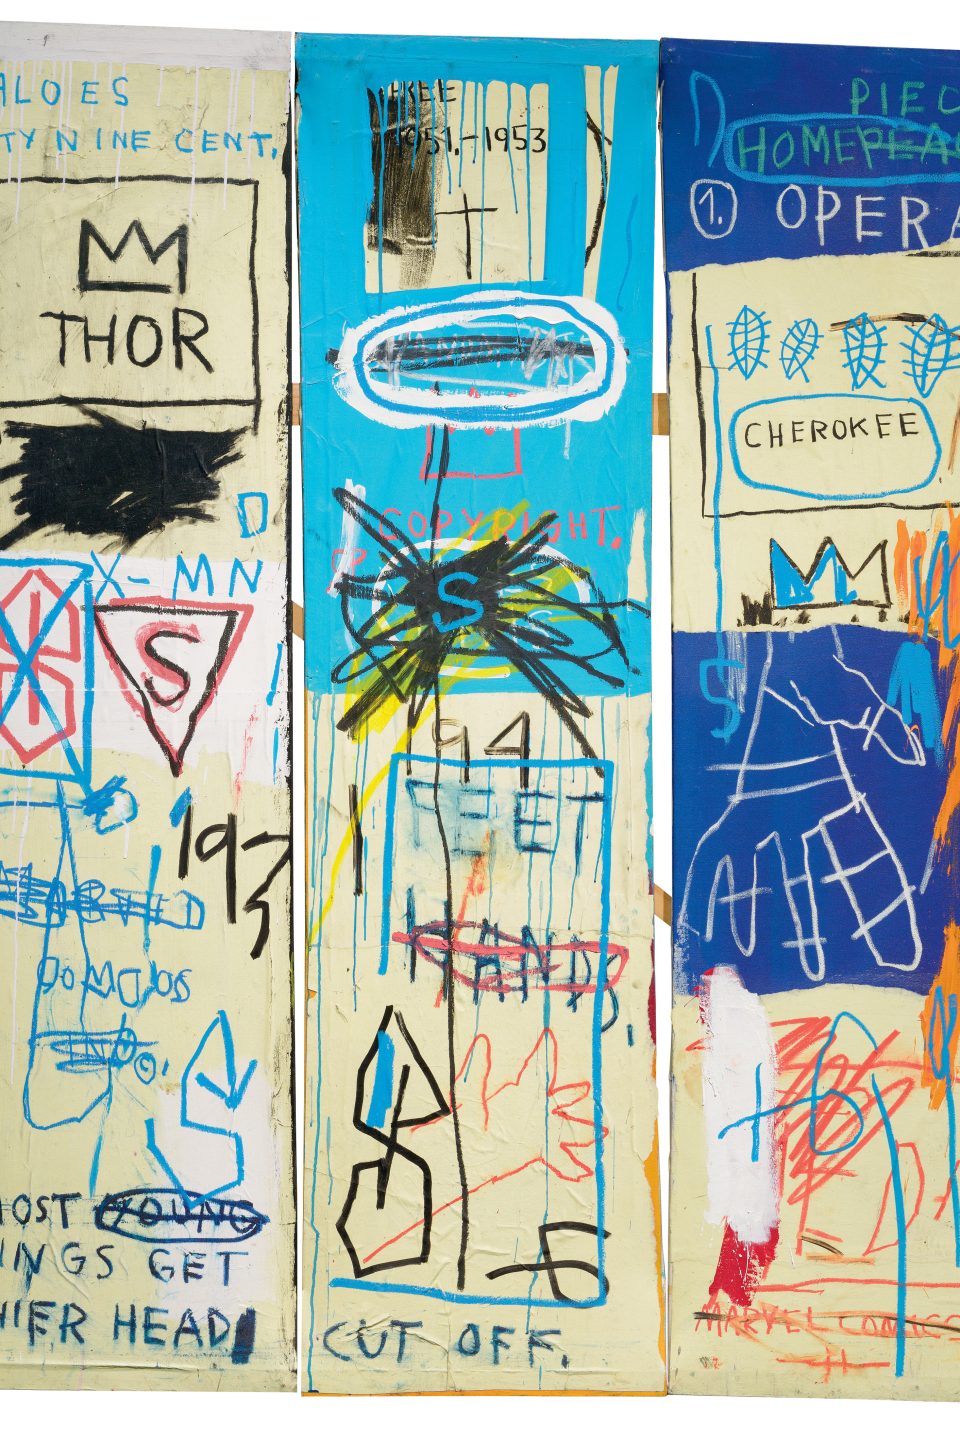 Paired with an Exhibition, This Jean-Michel Basquiat Book Details Both His Art and His Family Life